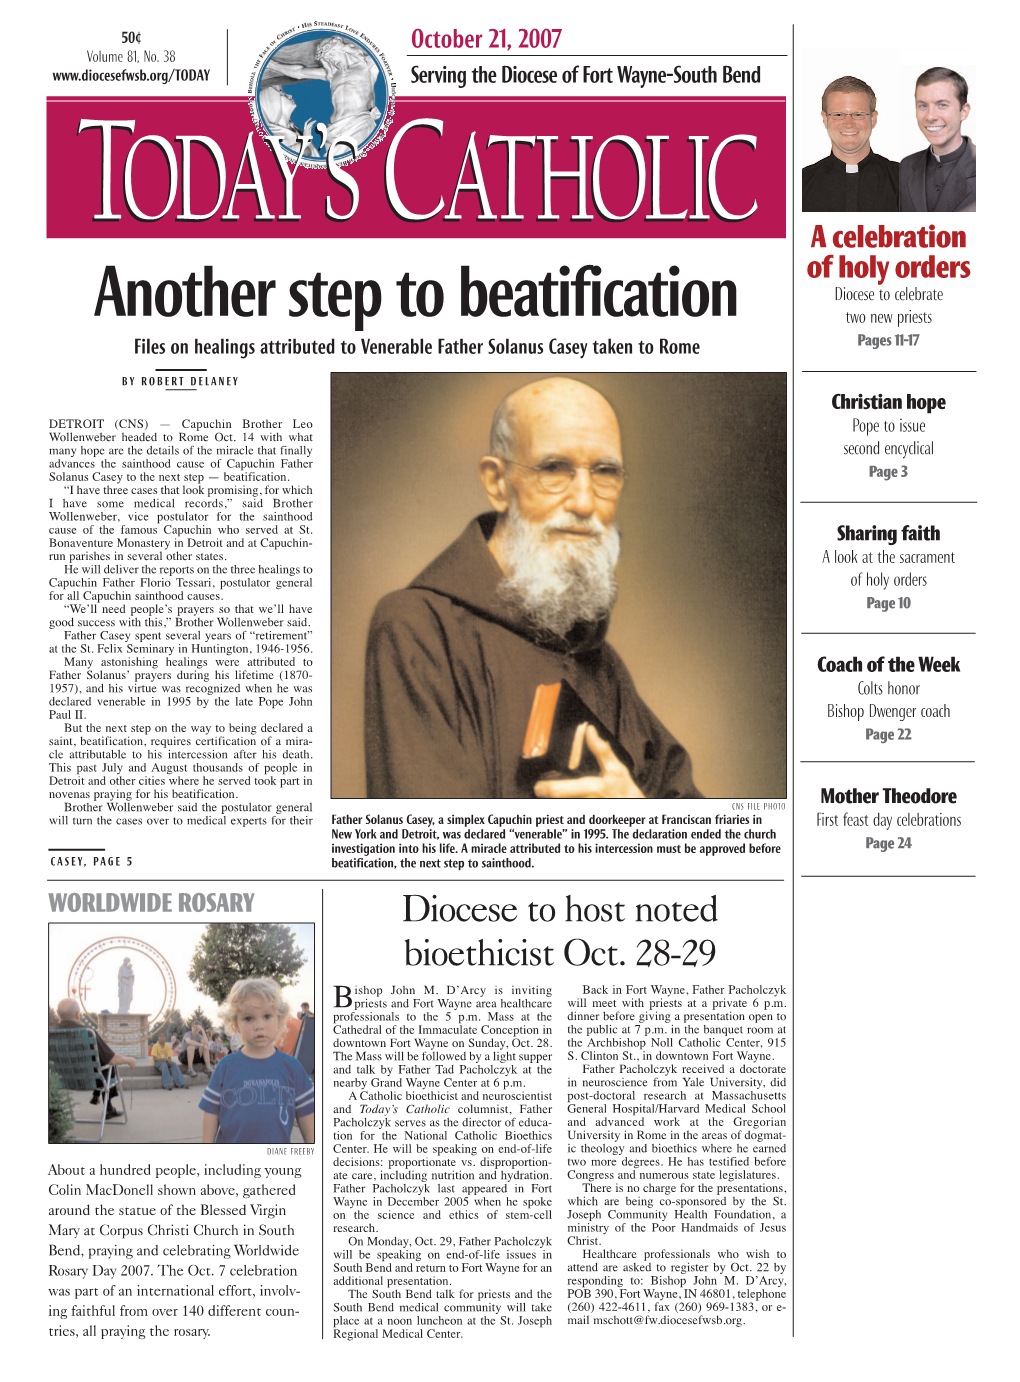 Another Step to Beatification Two New Priests Files on Healings Attributed to Venerable Father Solanus Casey Taken to Rome Pages 11-17